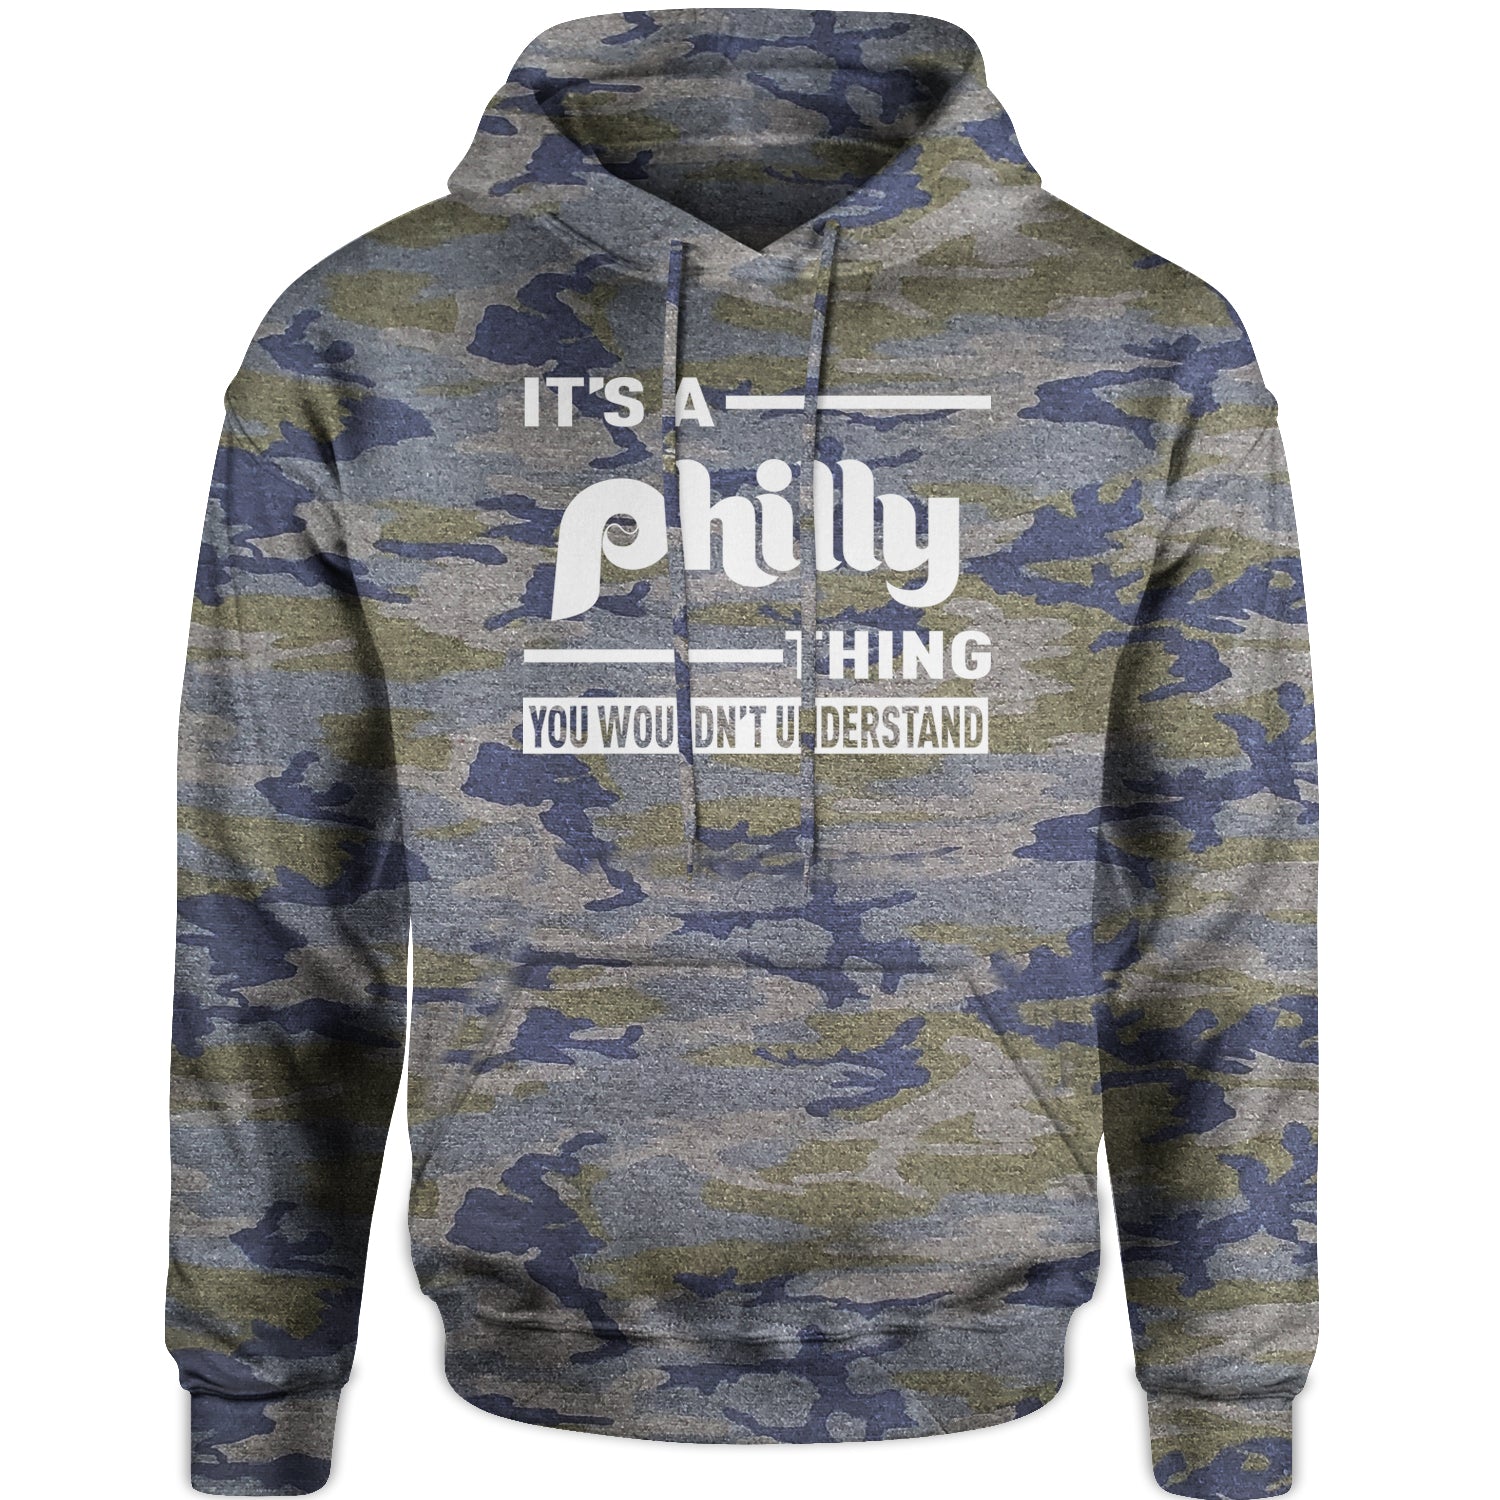 It's A Philly Thing, You Wouldn't Understand Adult Hoodie Sweatshirt baseball, filly, football, jawn, morgan, Philadelphia, philli by Expression Tees